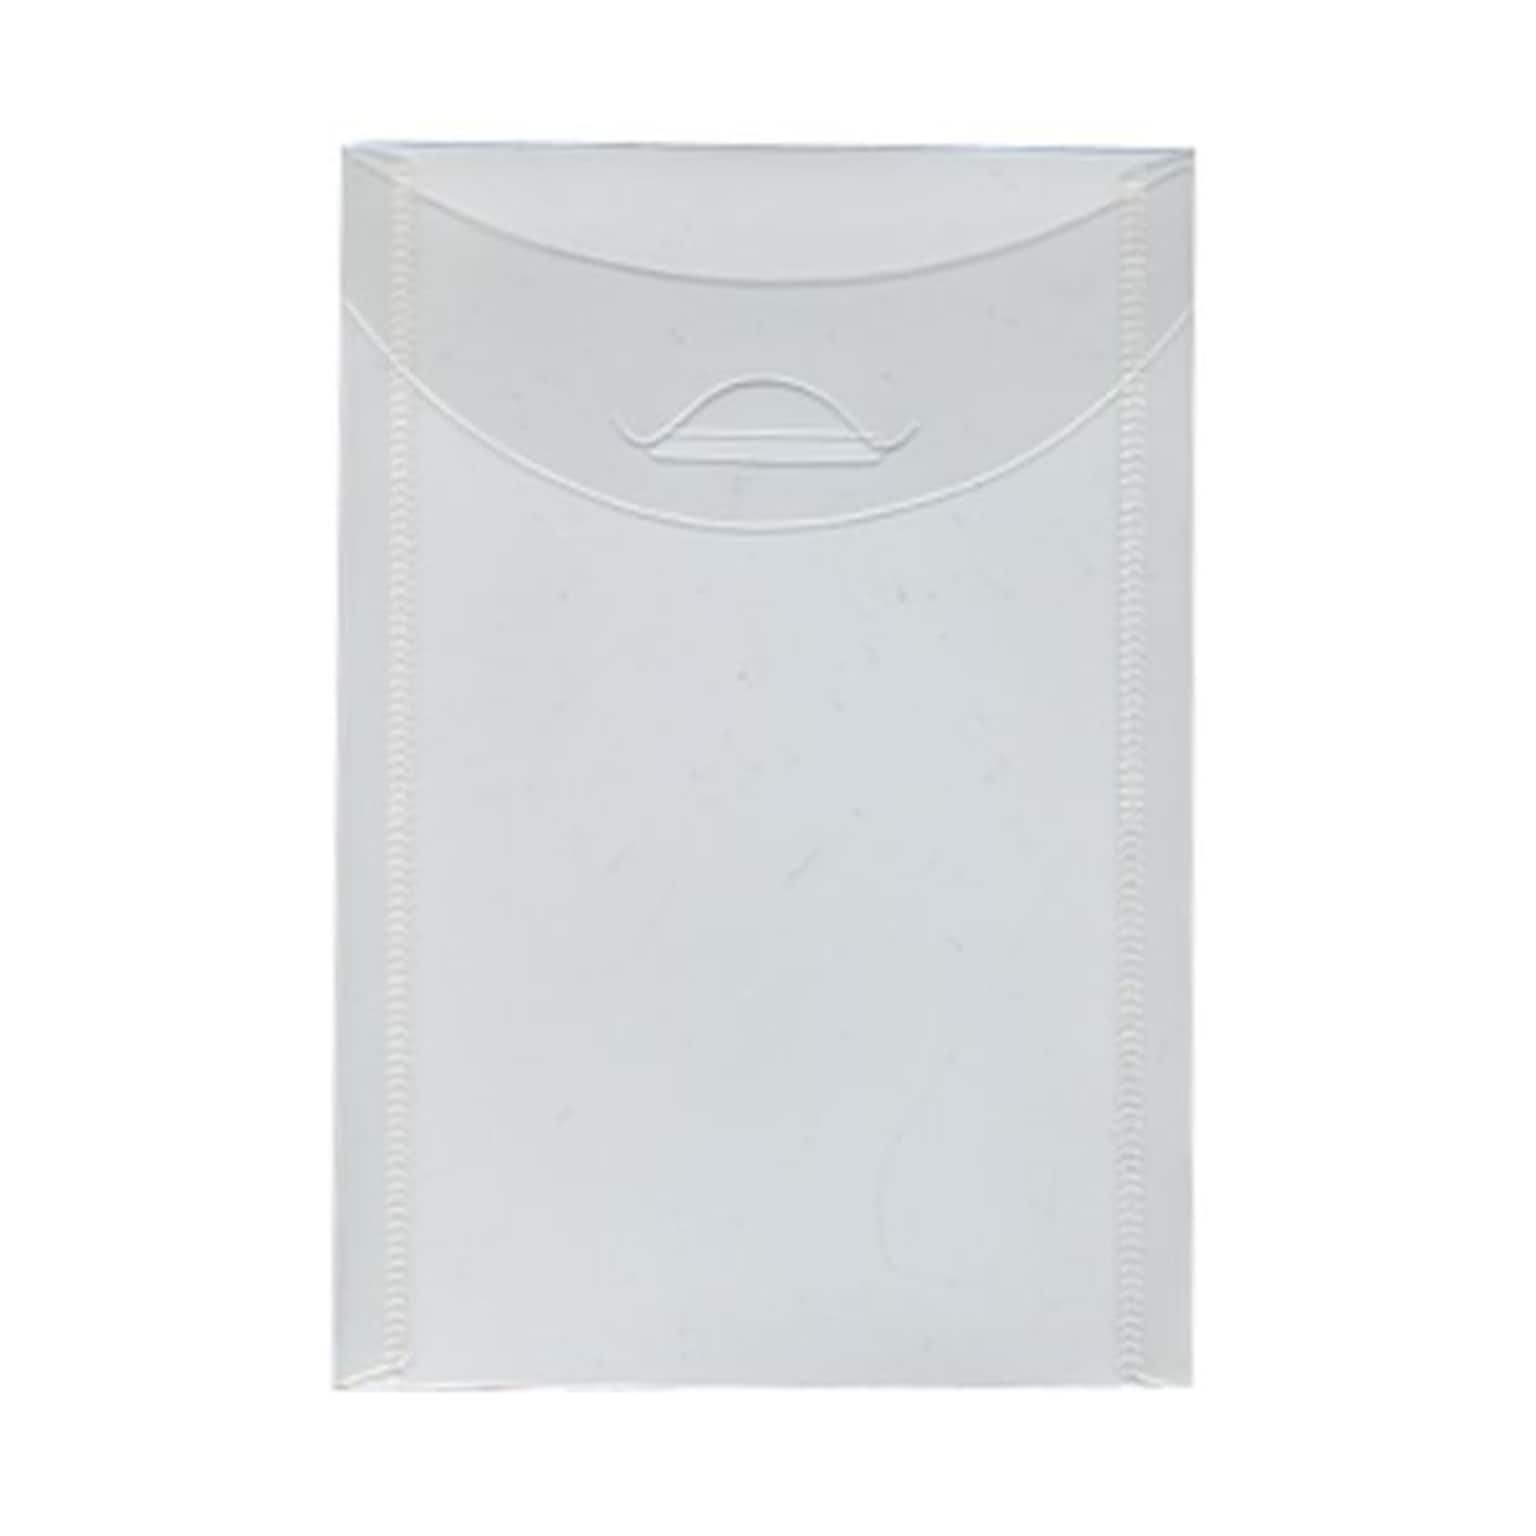 JAM Paper® Plastic Envelopes with Tuck Flap Closure, Open End, 4 1/8 x 6, Clear Poly, 12/Pack (1541745)